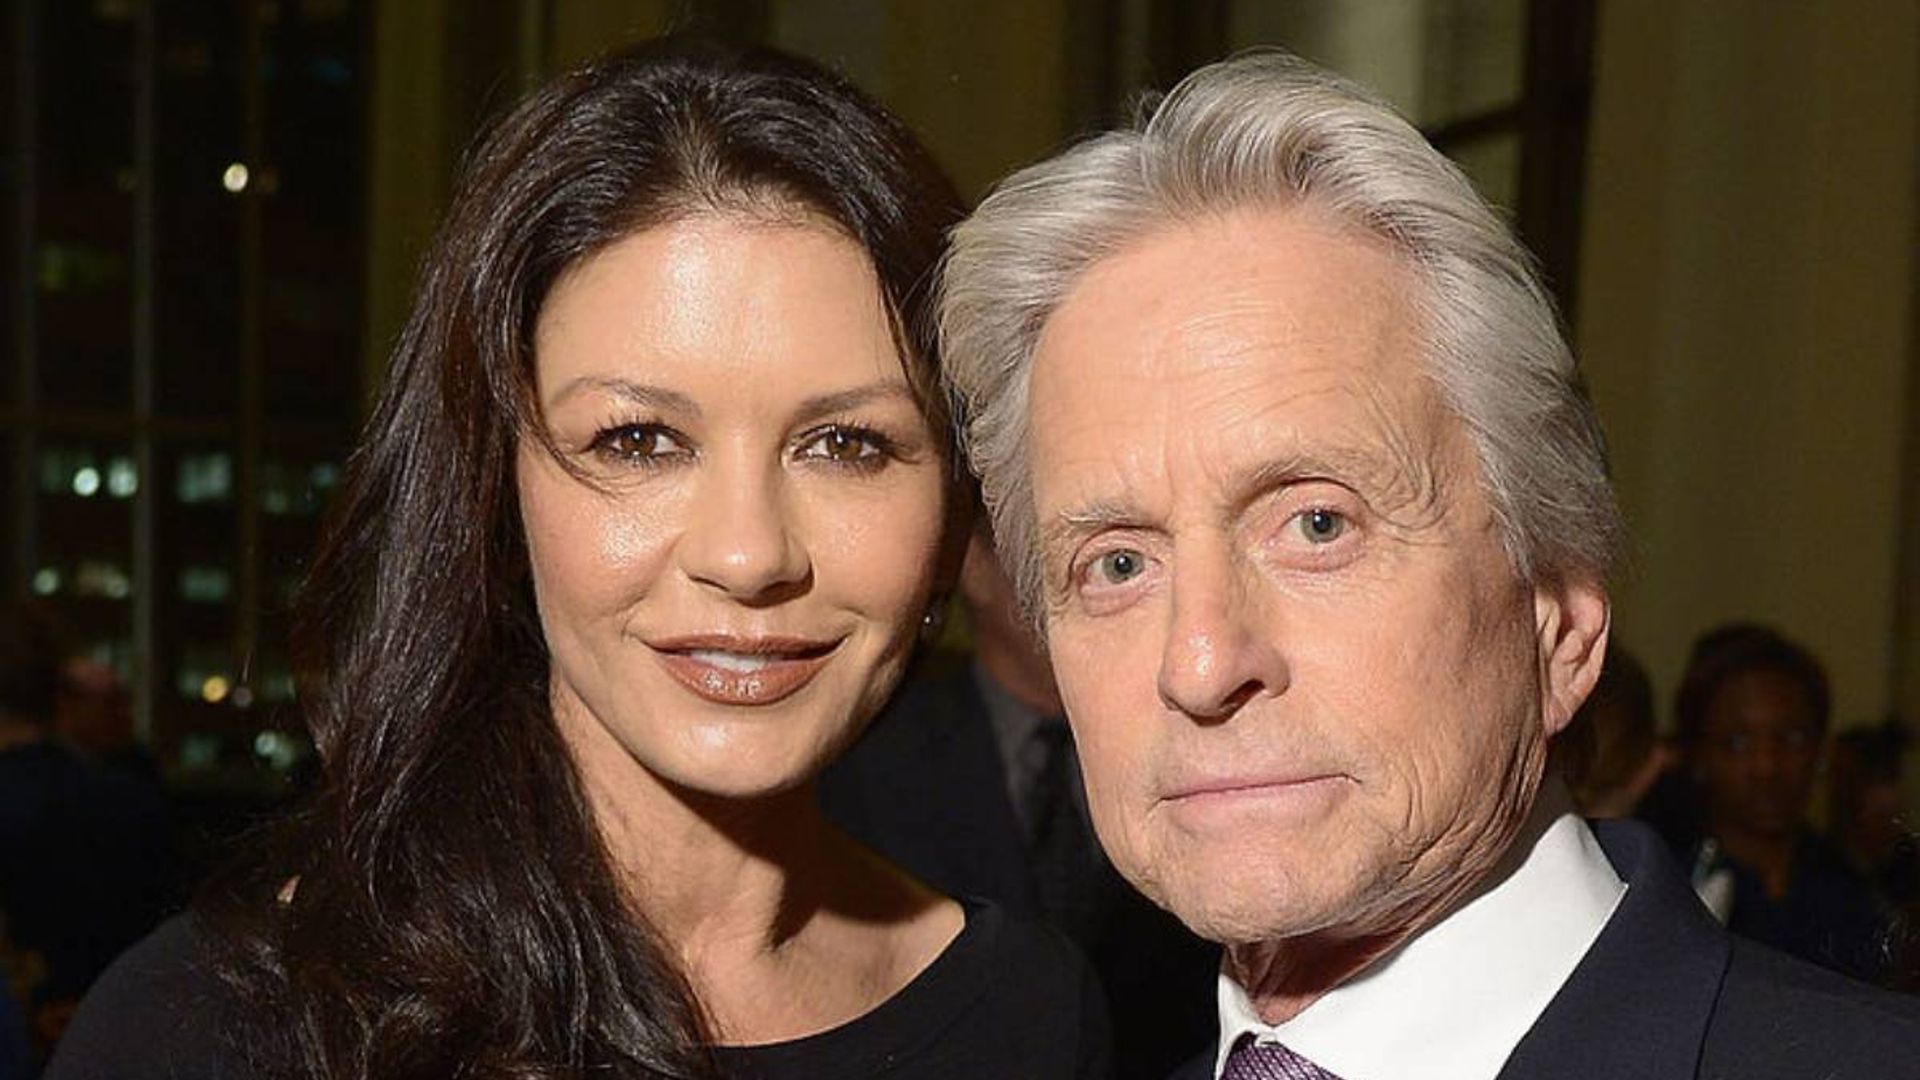 Michael Douglas Latest News Pictures Videos Hello His popular films included fatal attraction (1987), wall street (1987). michael douglas latest news pictures